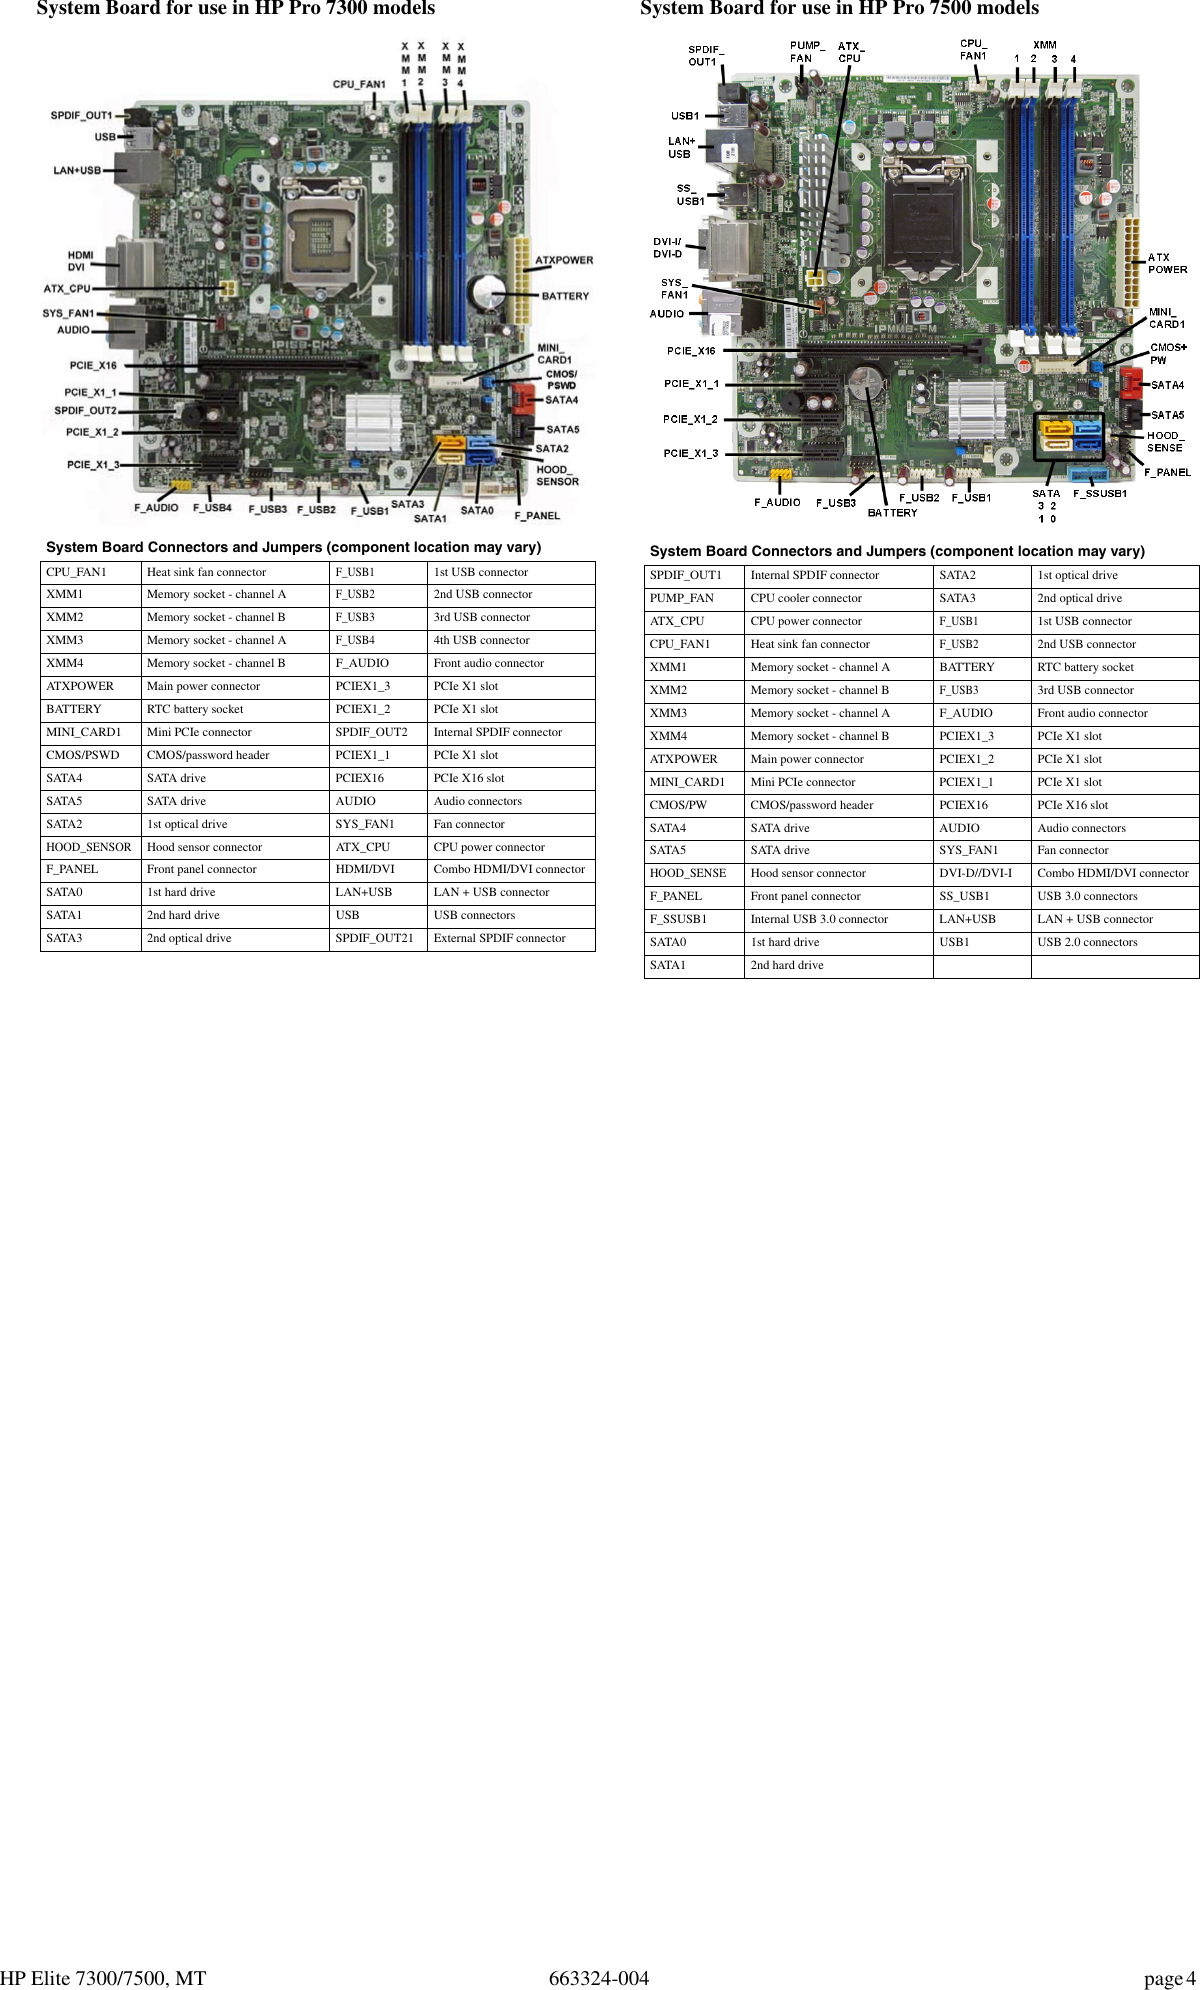 Page 4 of 4 - Hp Hp-Elite-7500-Microtower-Pc-Reference-Guide- Pirates 7500 MT IPSM_Win8  Hp-elite-7500-microtower-pc-reference-guide